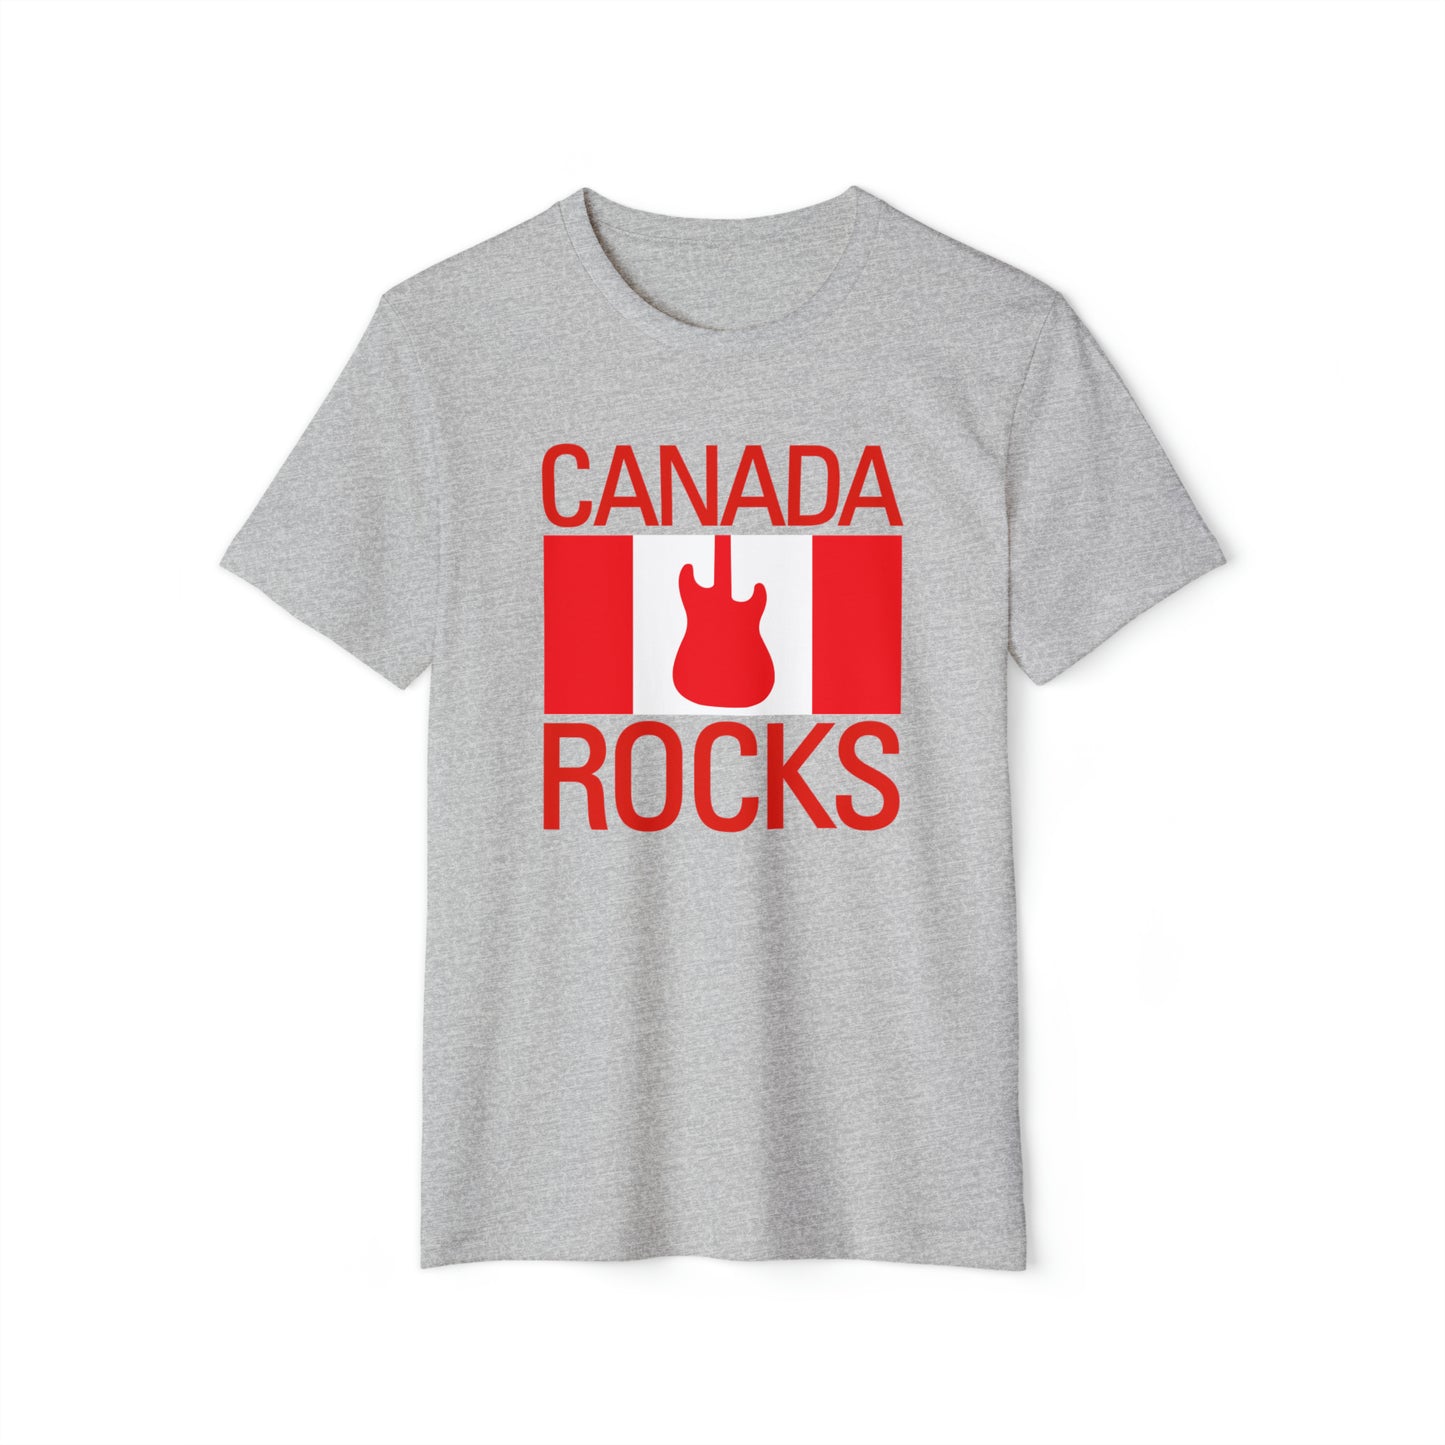 CANADA ROCKS  Organic Cotton Recycled Polyester Bella+Canvas 3001 Music-themed unisex T-Shirt